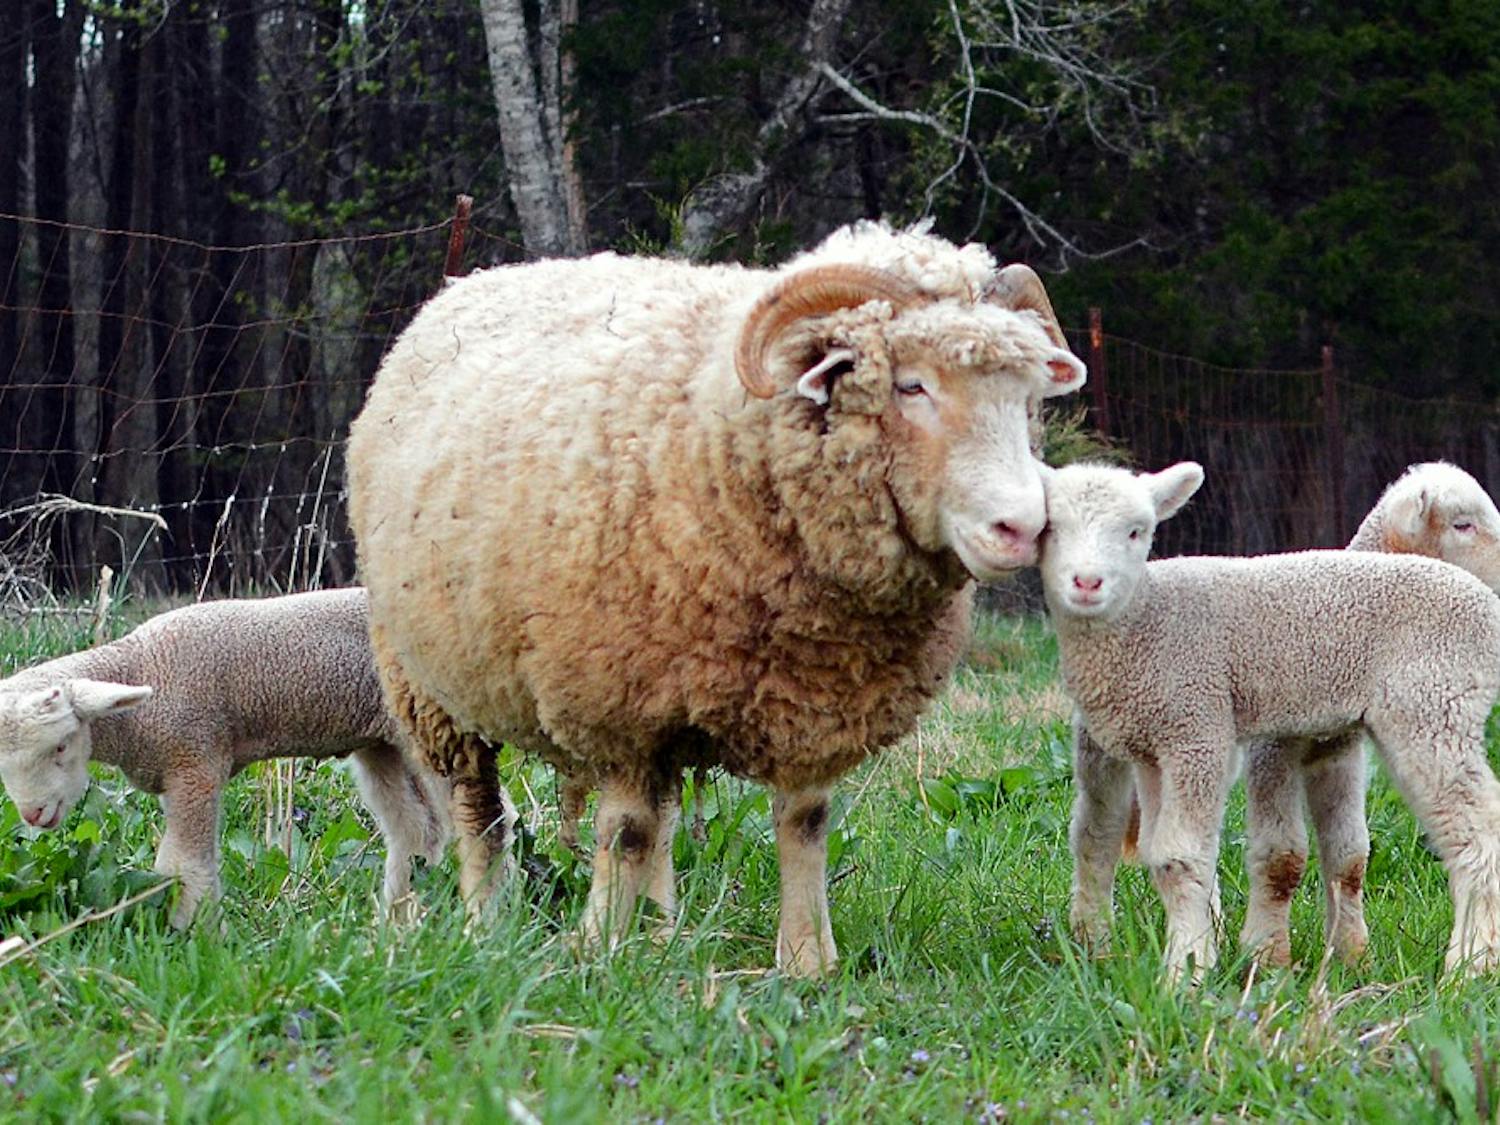 Several rams roam about at Hogan’s Magnolia View Farm on Old N.C. 86 on Tuesday evening. Rameses, UNC’s mascot, recently became the father of three baby lambs.